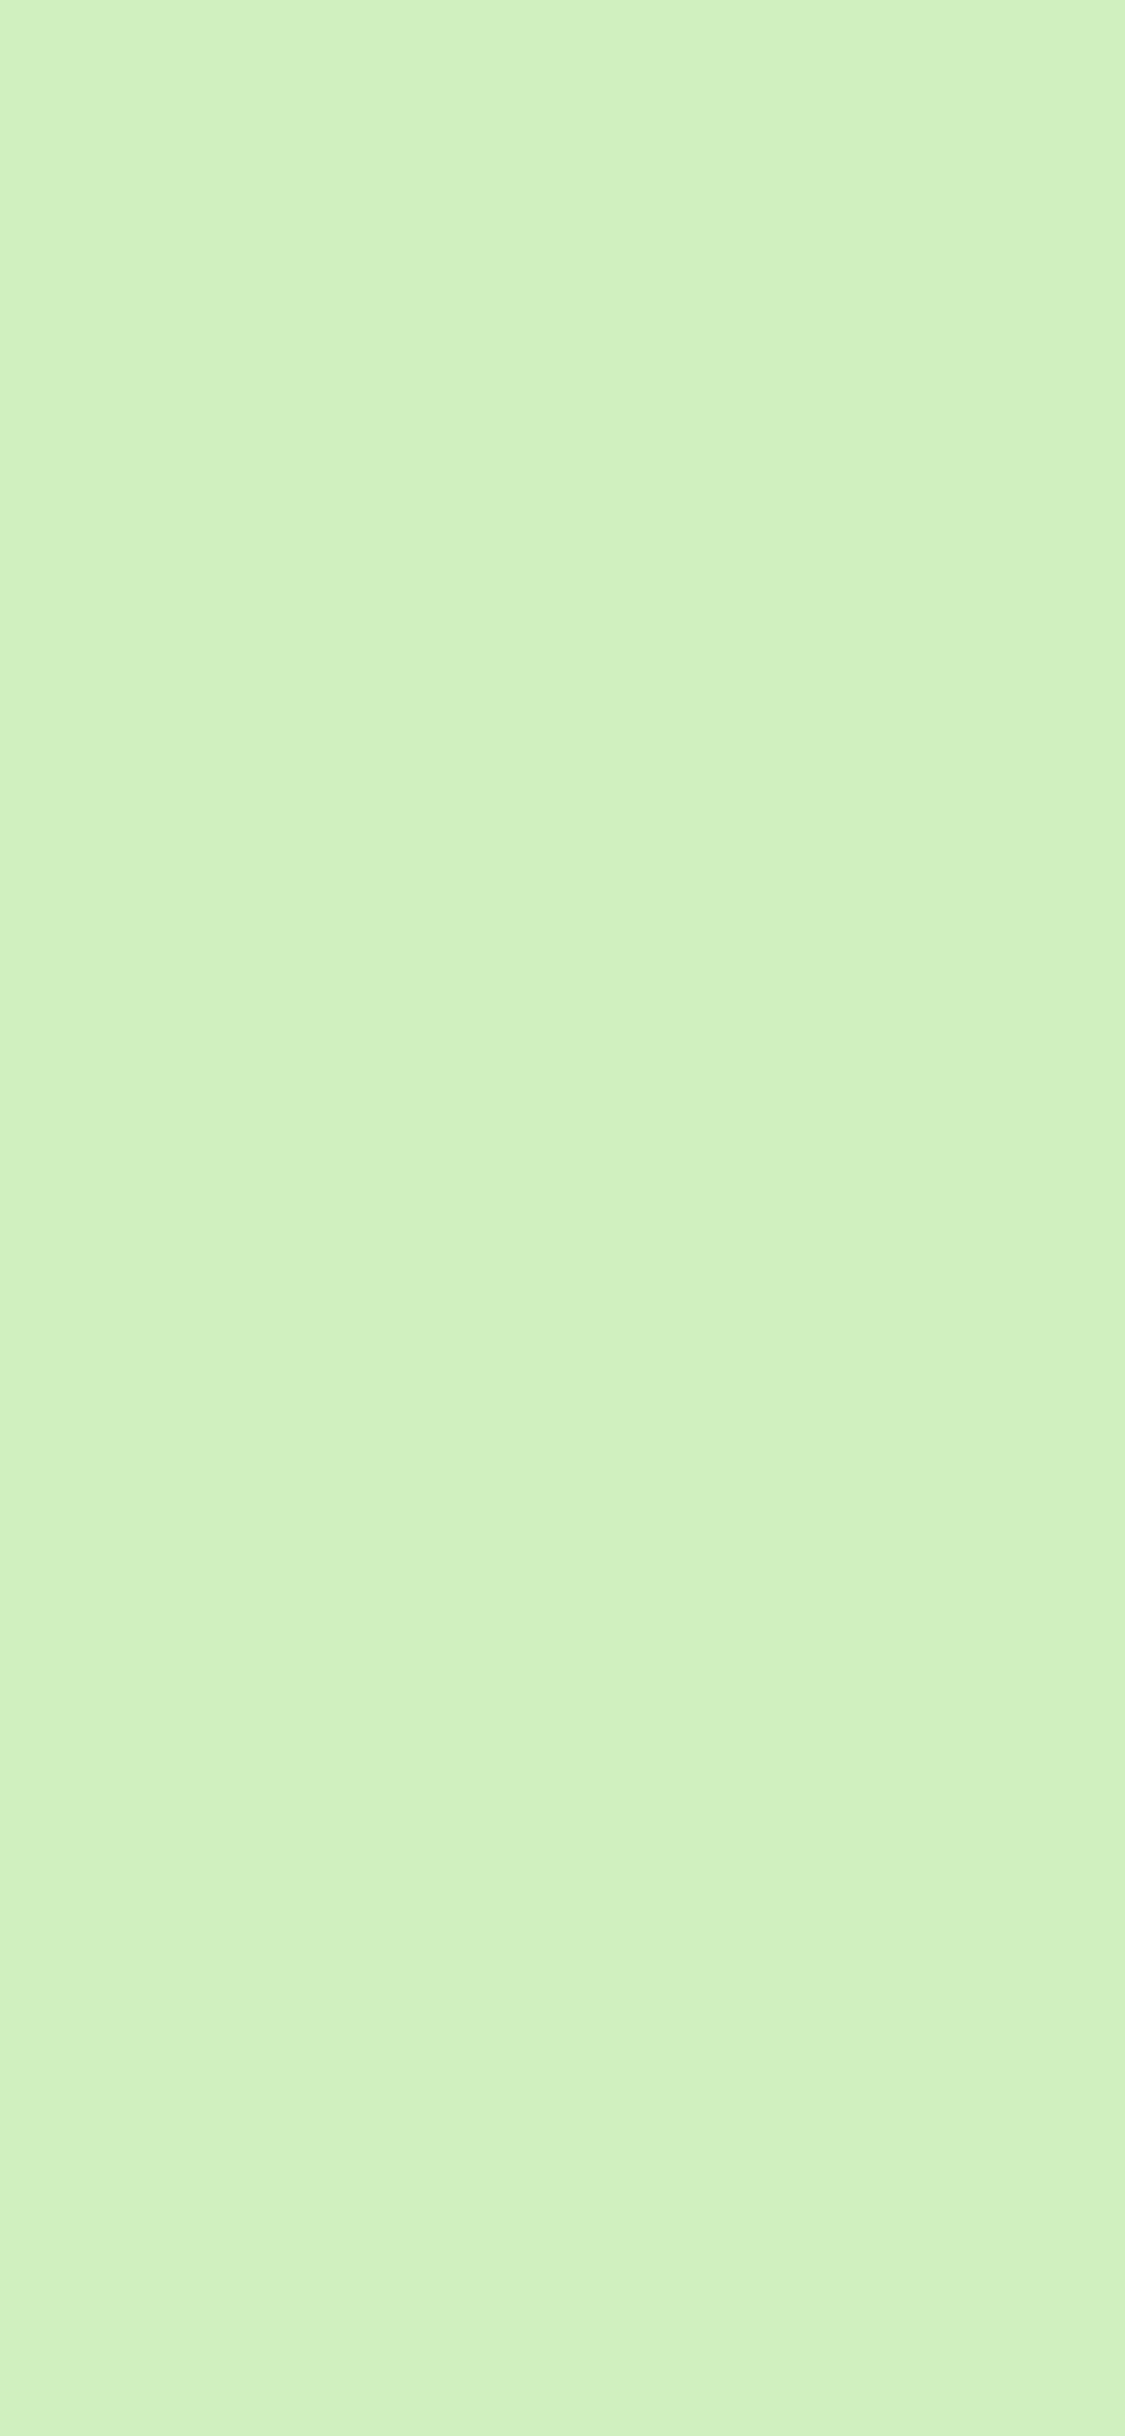 1125x2436 Tea Green Solid Color Background